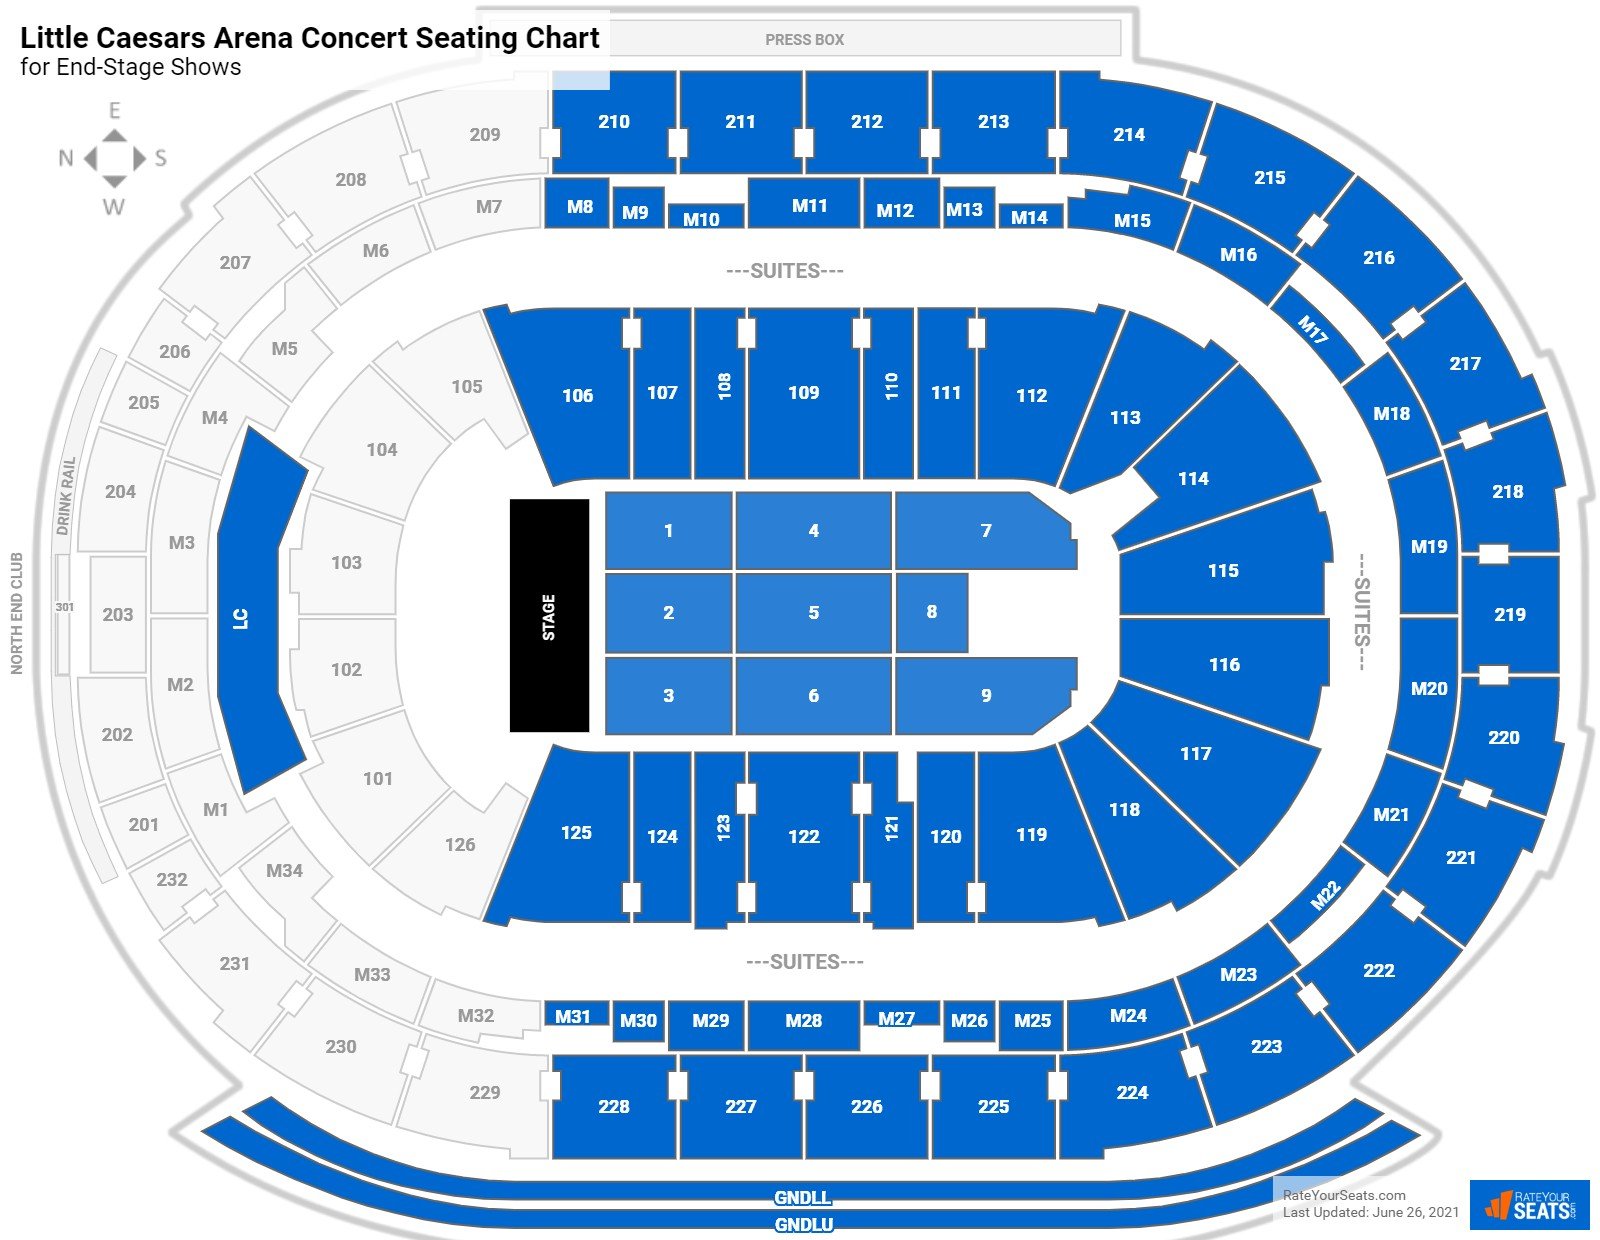 Little Caesars Arena Concert Seating Chart